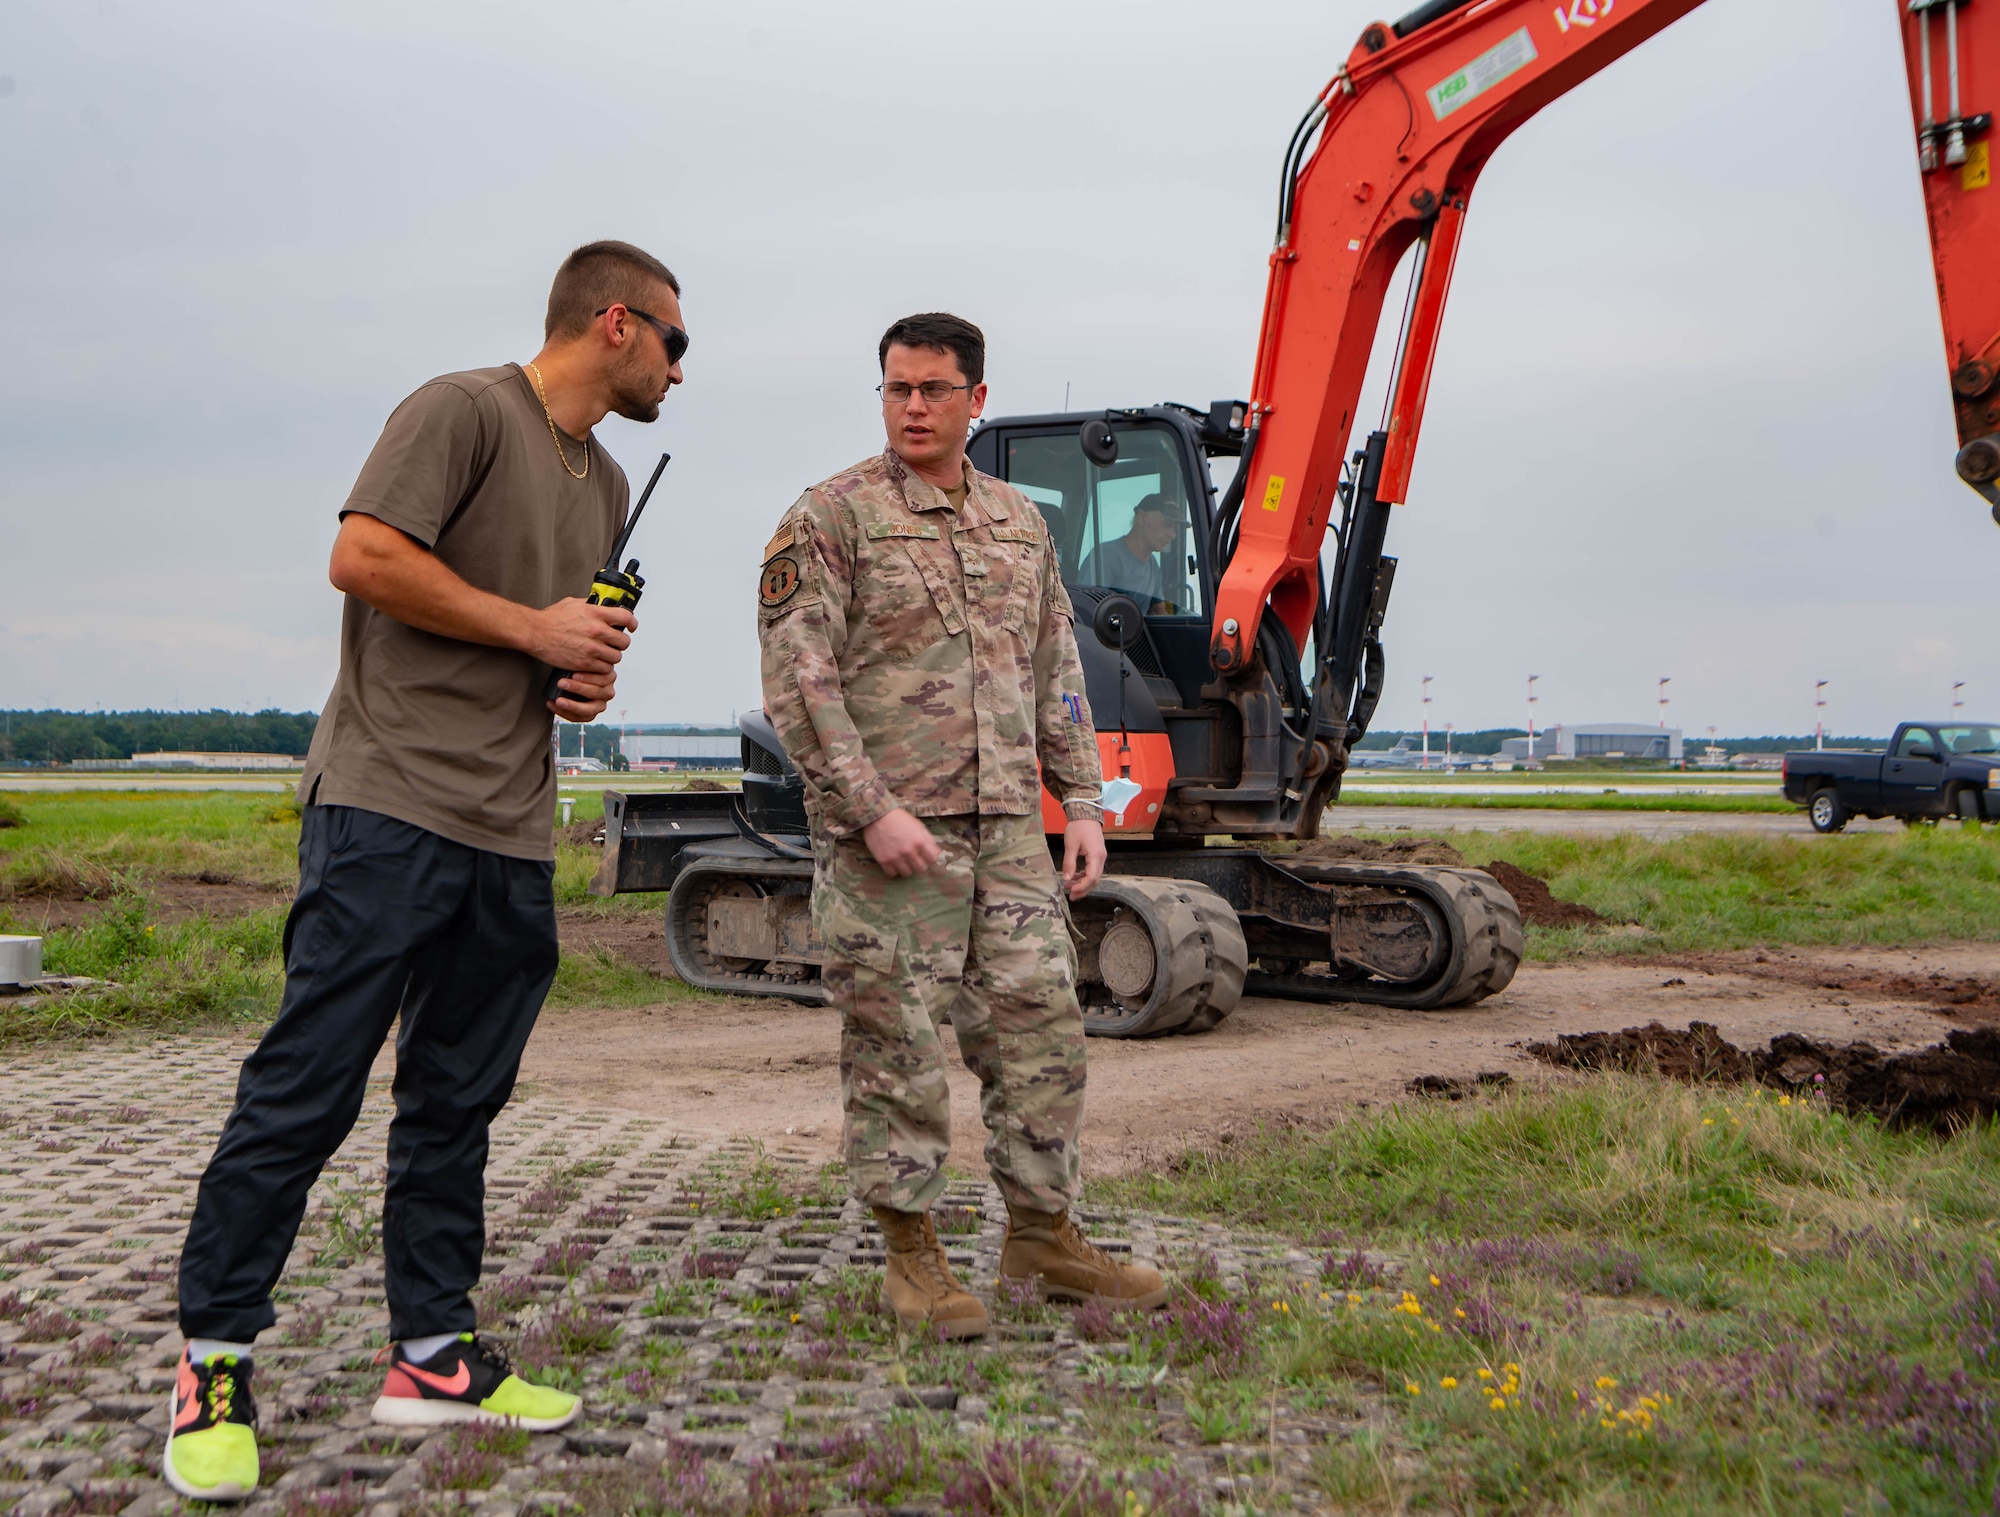 U.S. Air Force Senior Airman James Jones, a controlled movement area escort and project manager assigned to the 86th Civil Engineering Squadron,  talks to an escort augmentee at a construction site at Ramstein Air Base, Germany, July 27, 2021. Escort workers make sure that the contractors do not cross over restricted area lines and stay away from certain areas when planes are landing for security and safety of everyone on the airfield. 
(U.S. Air Force photo by Airman Jared Lovett)